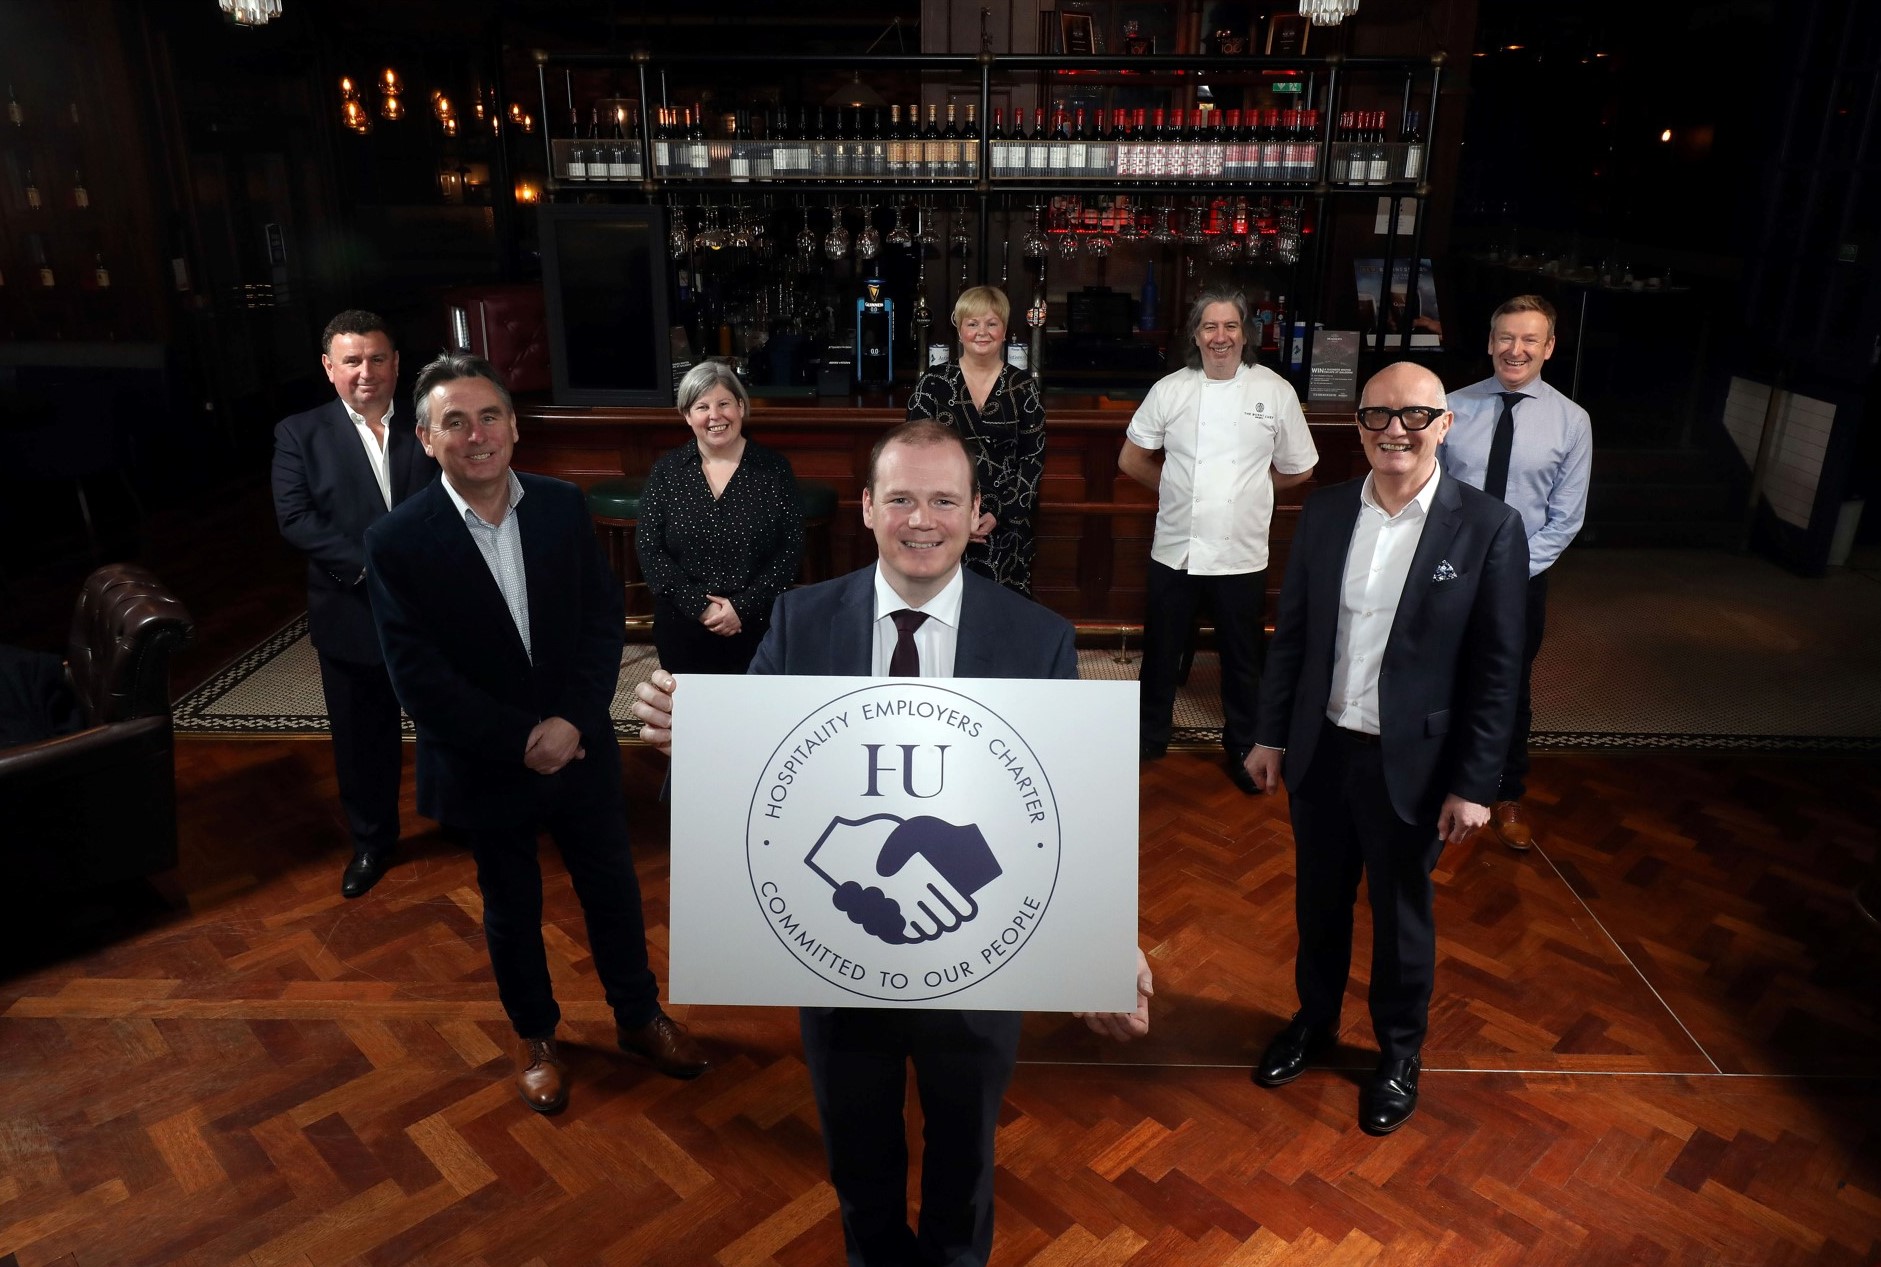 NEW HOSPITALITY EMPLOYERS CHARTER LAUNCHED